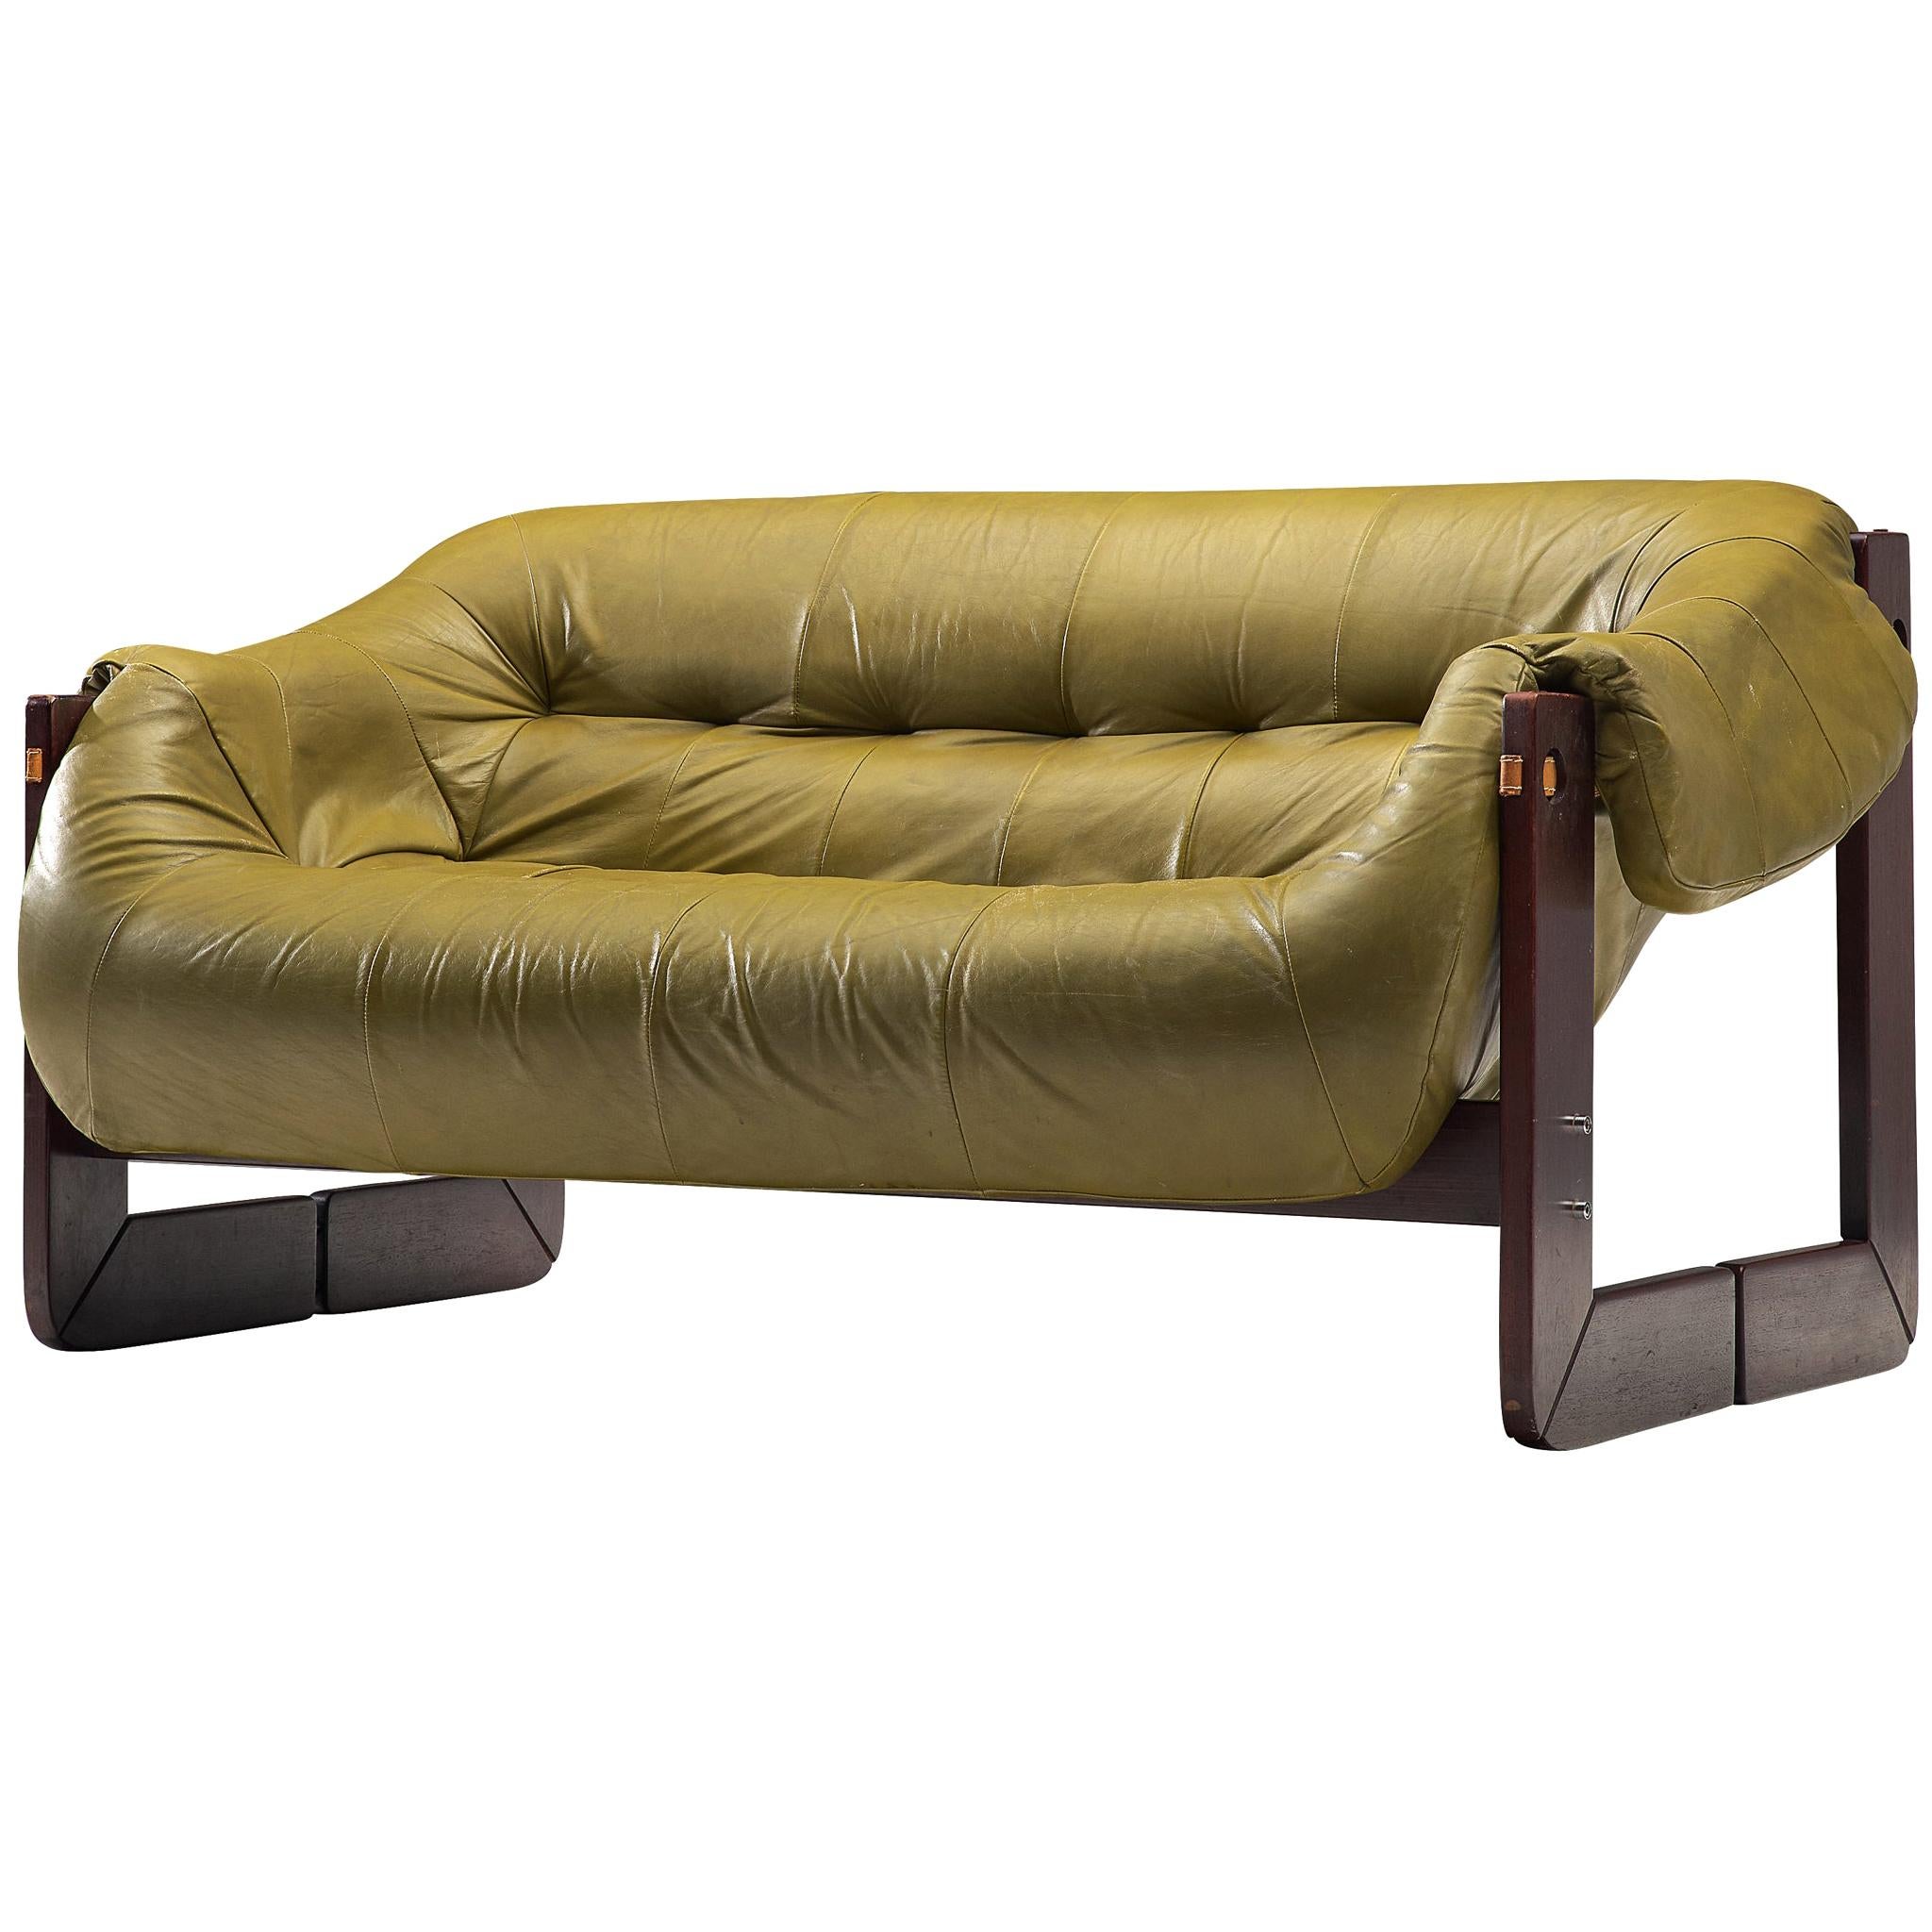 Percival Lafer Sofa in Moss Green Leather